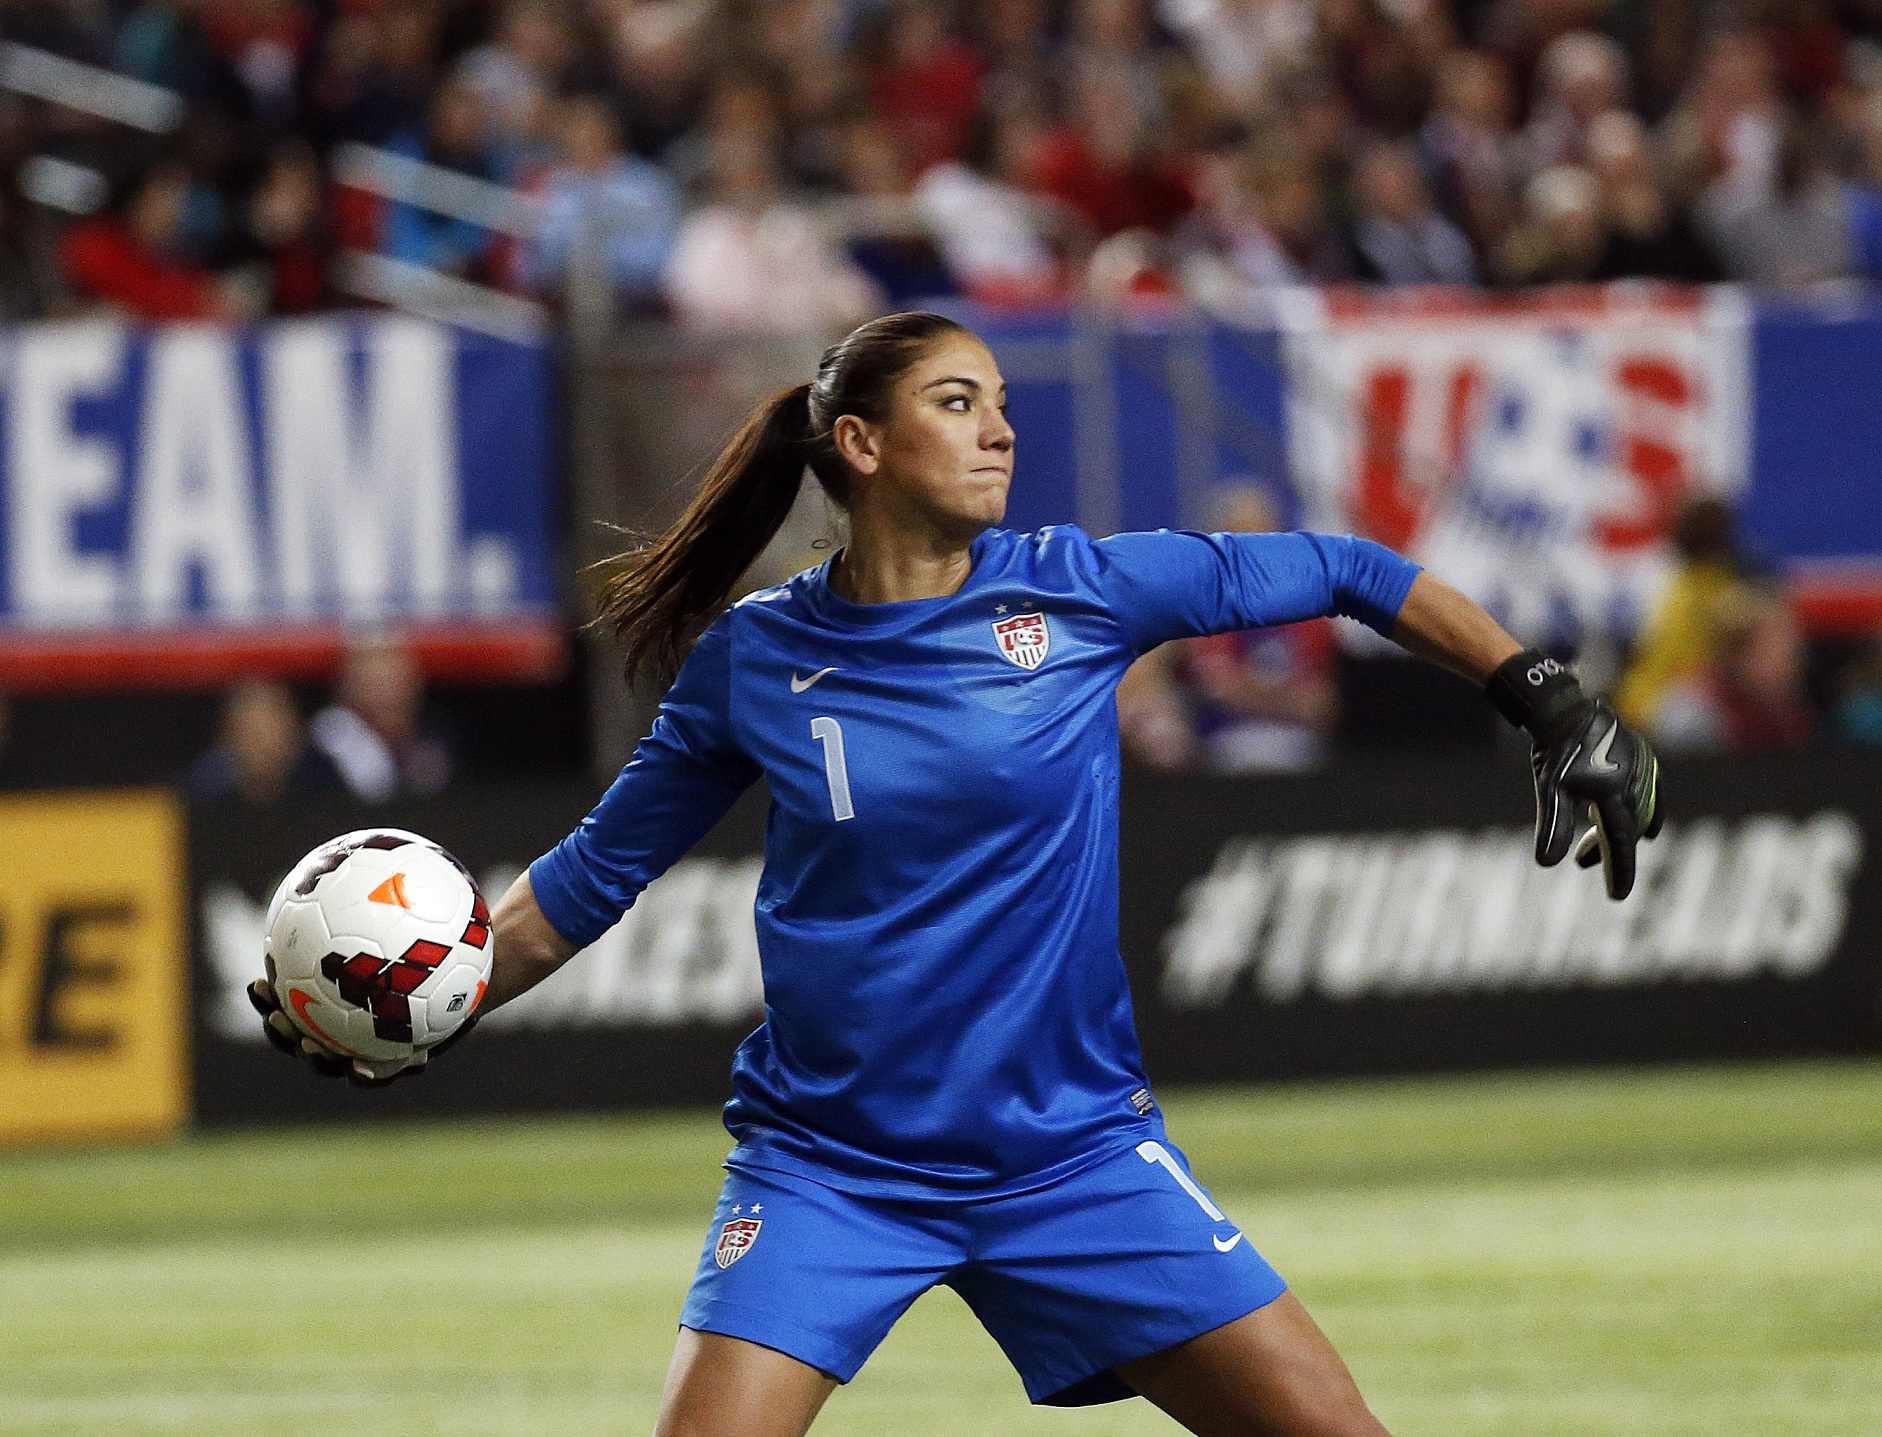 Hope Solo Wallpapers